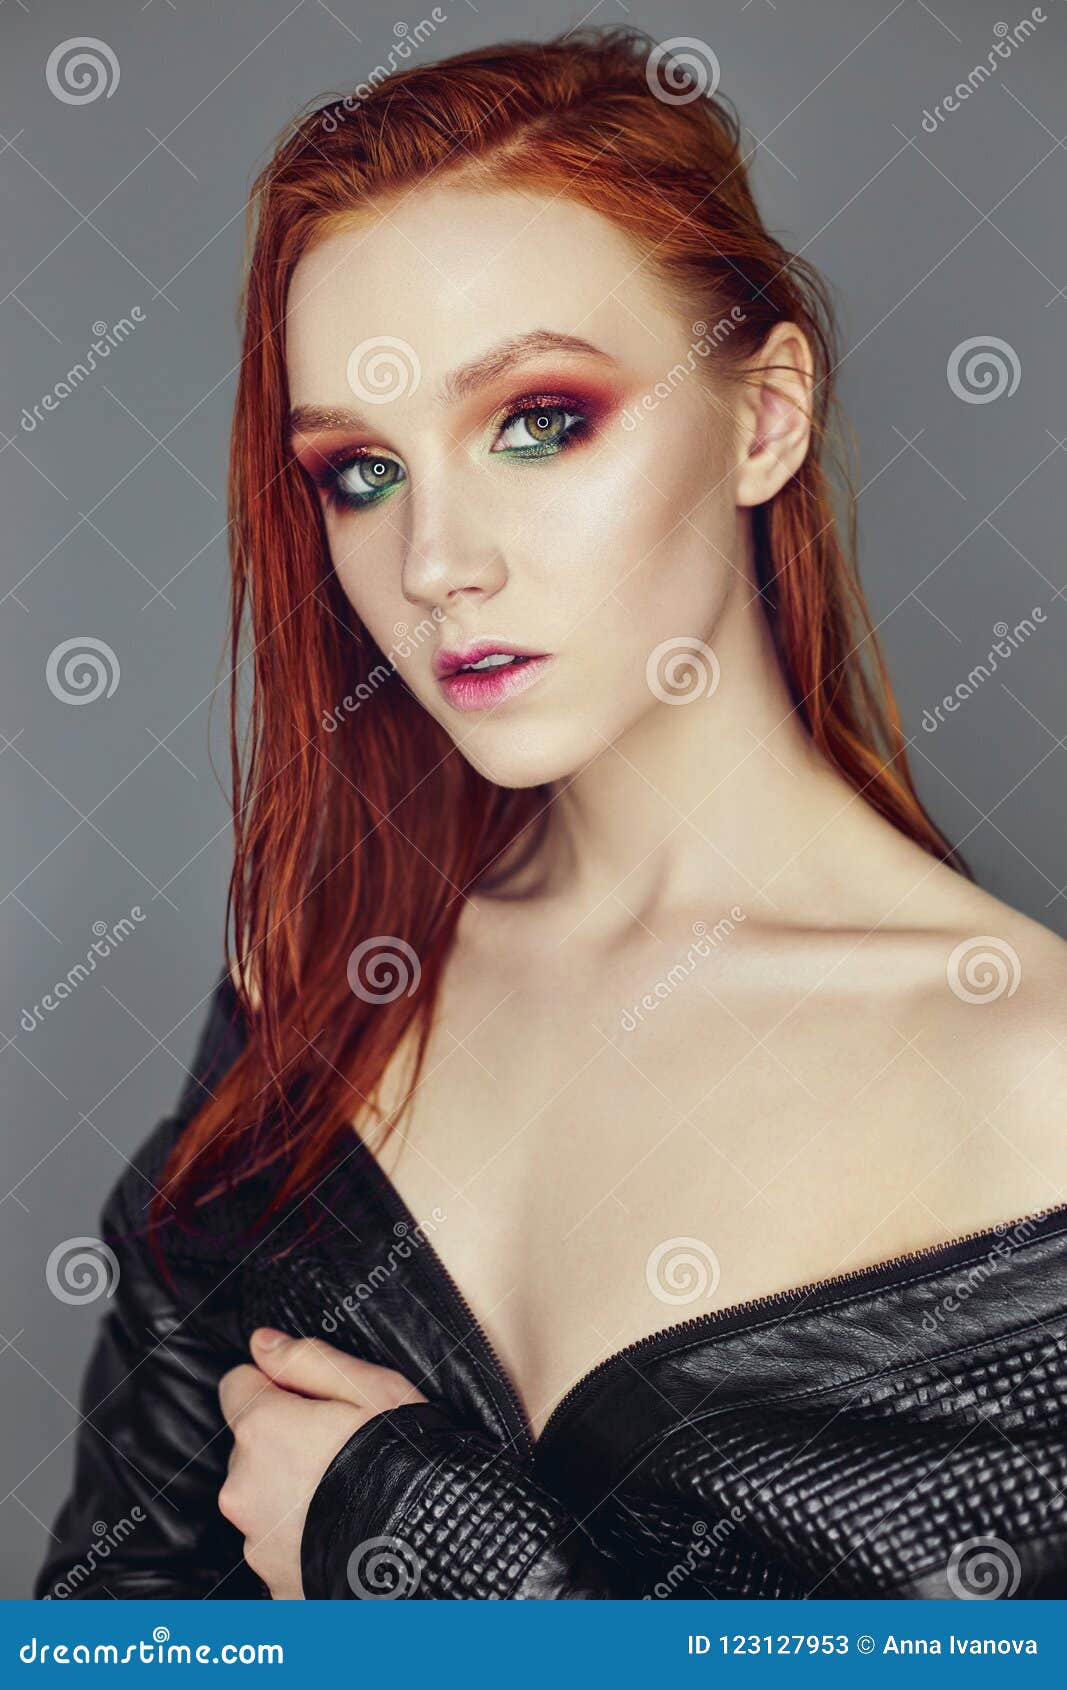 danny stefanic recommends Beautiful Nude Redheads